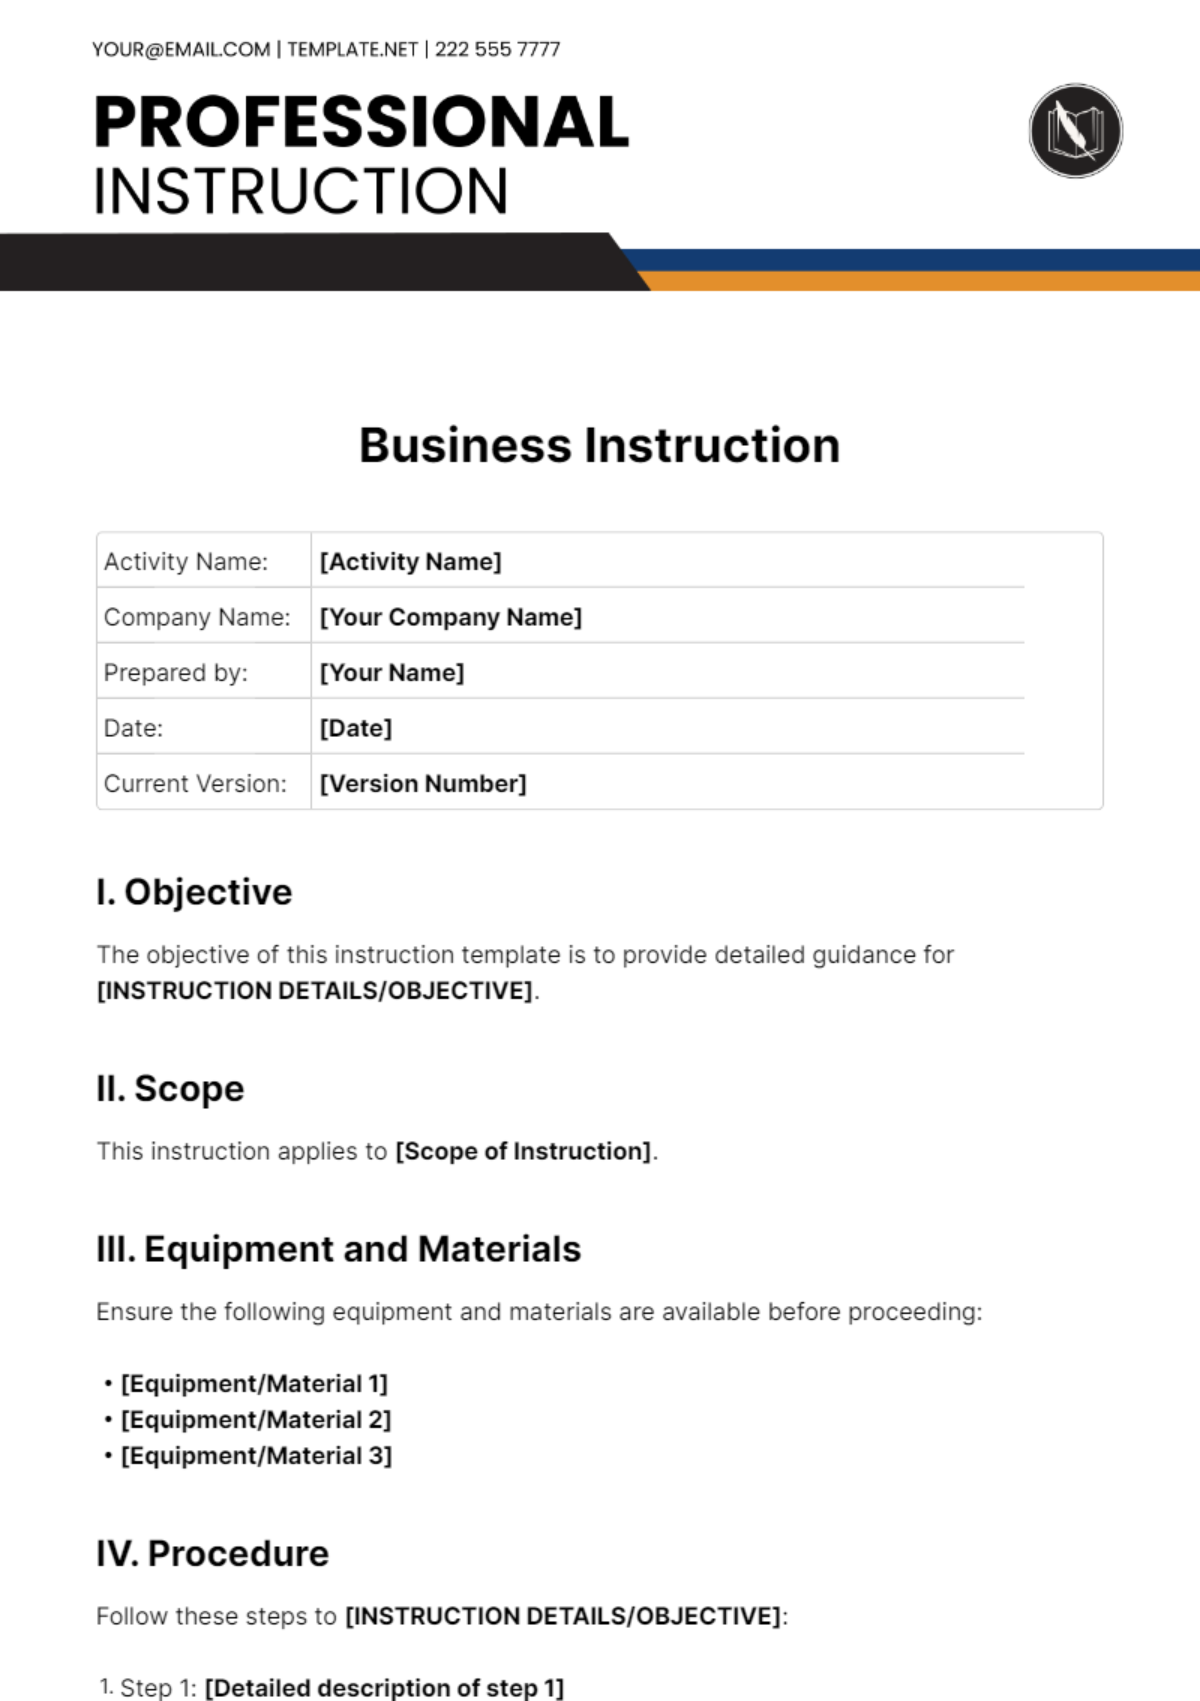 Business Instruction Template